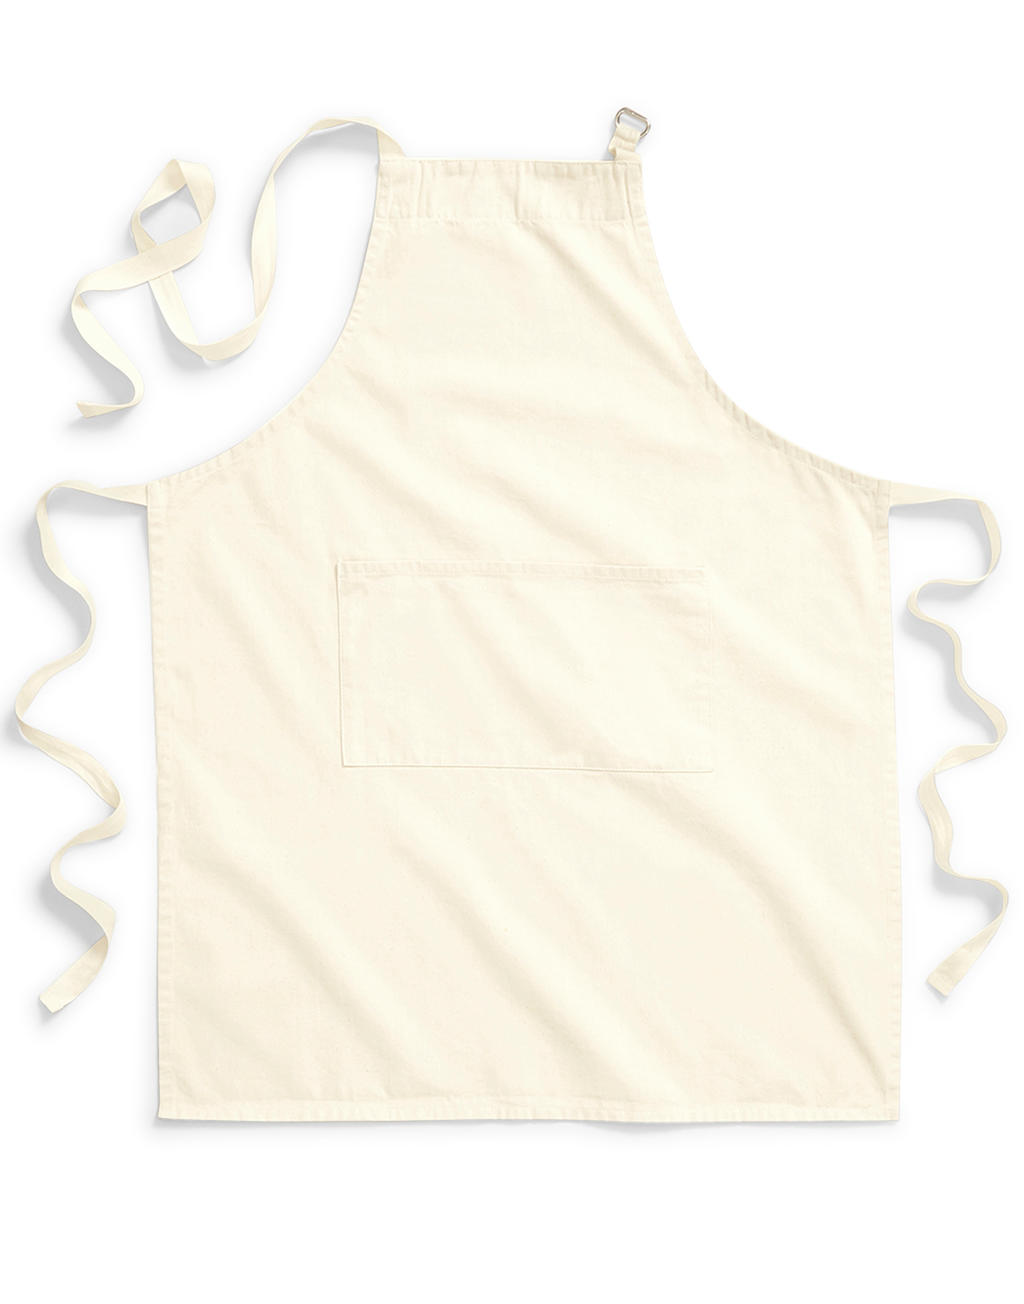  FairTrade Cotton Adult Craft Apron in Farbe Natural